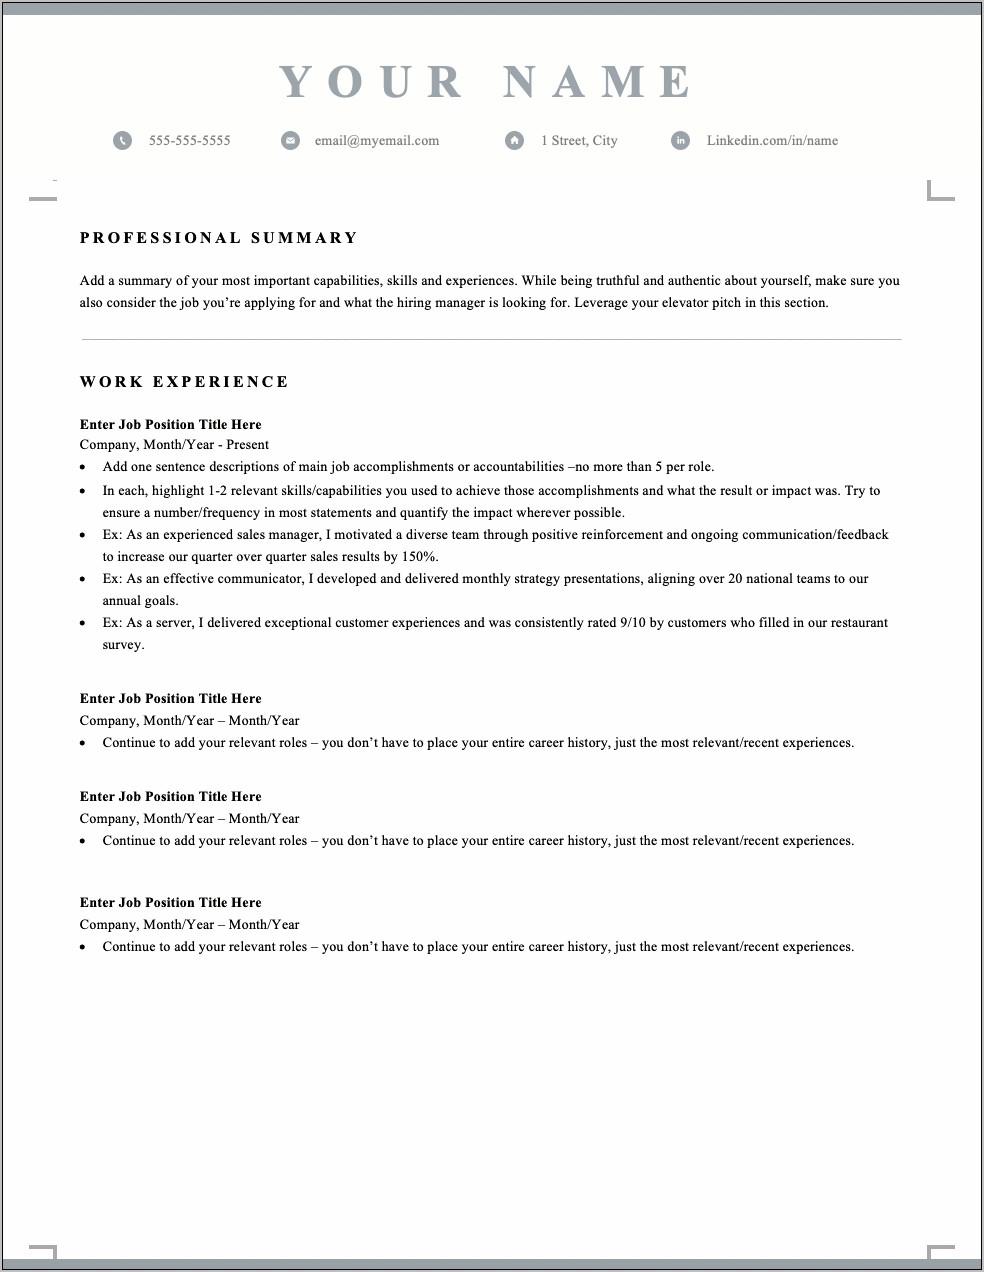 Cb Acronym In Work Experience On Resume